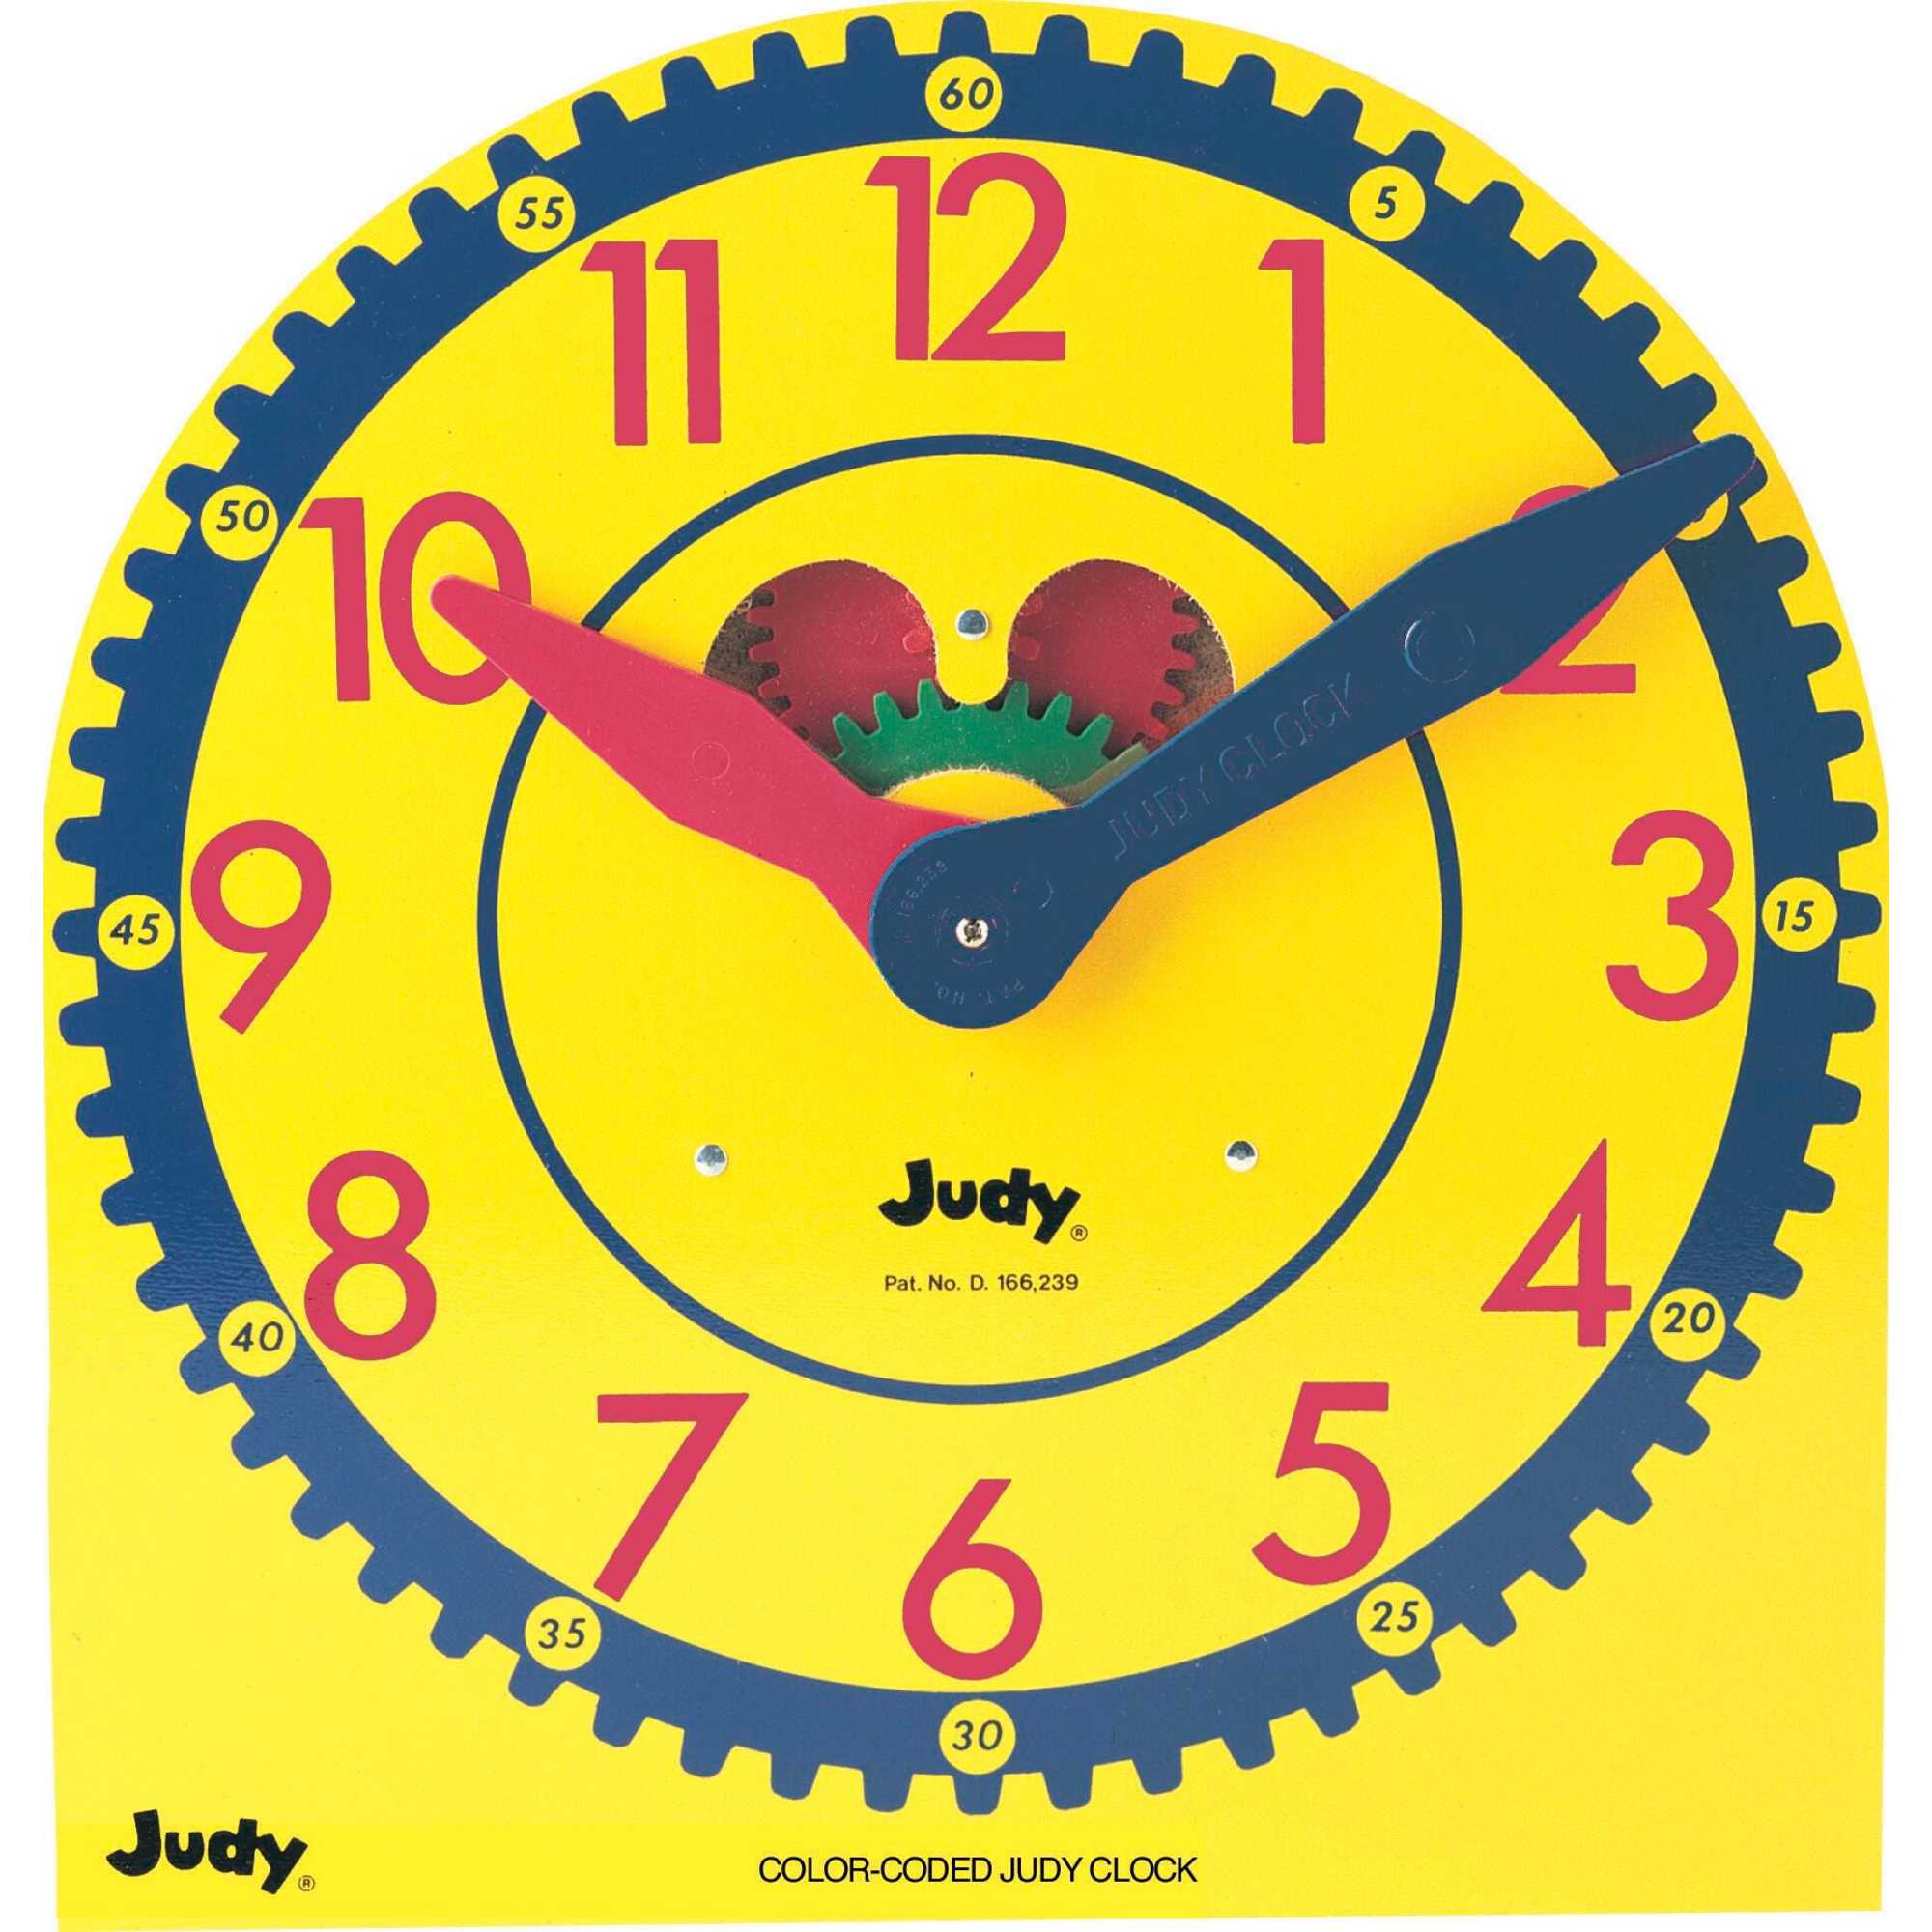 Color-Coded Judy® Clock - image 1 of 3